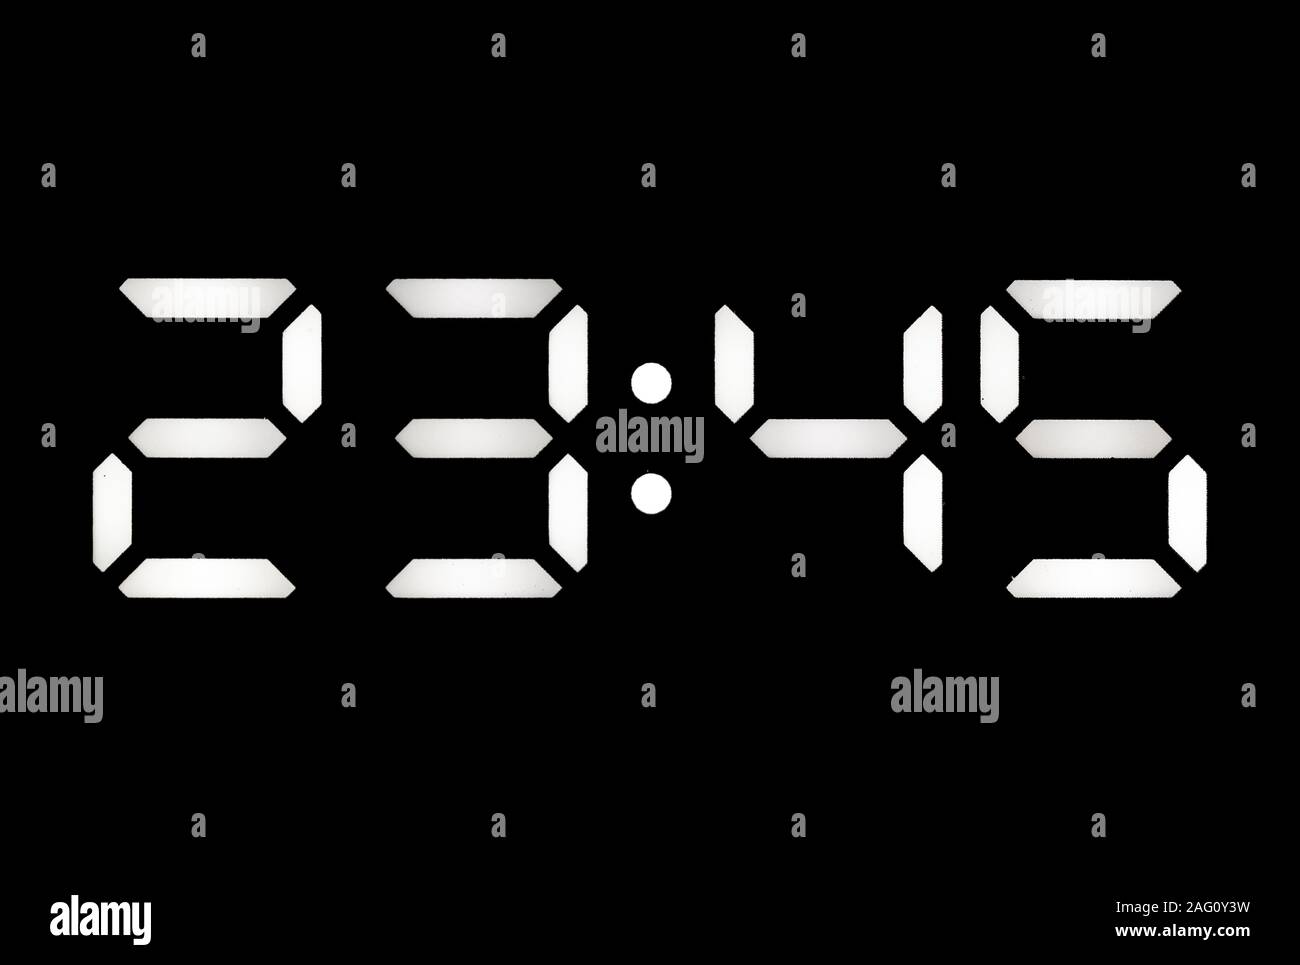 Real white led digital clock on a black background showing time 23:45 Stock Photo